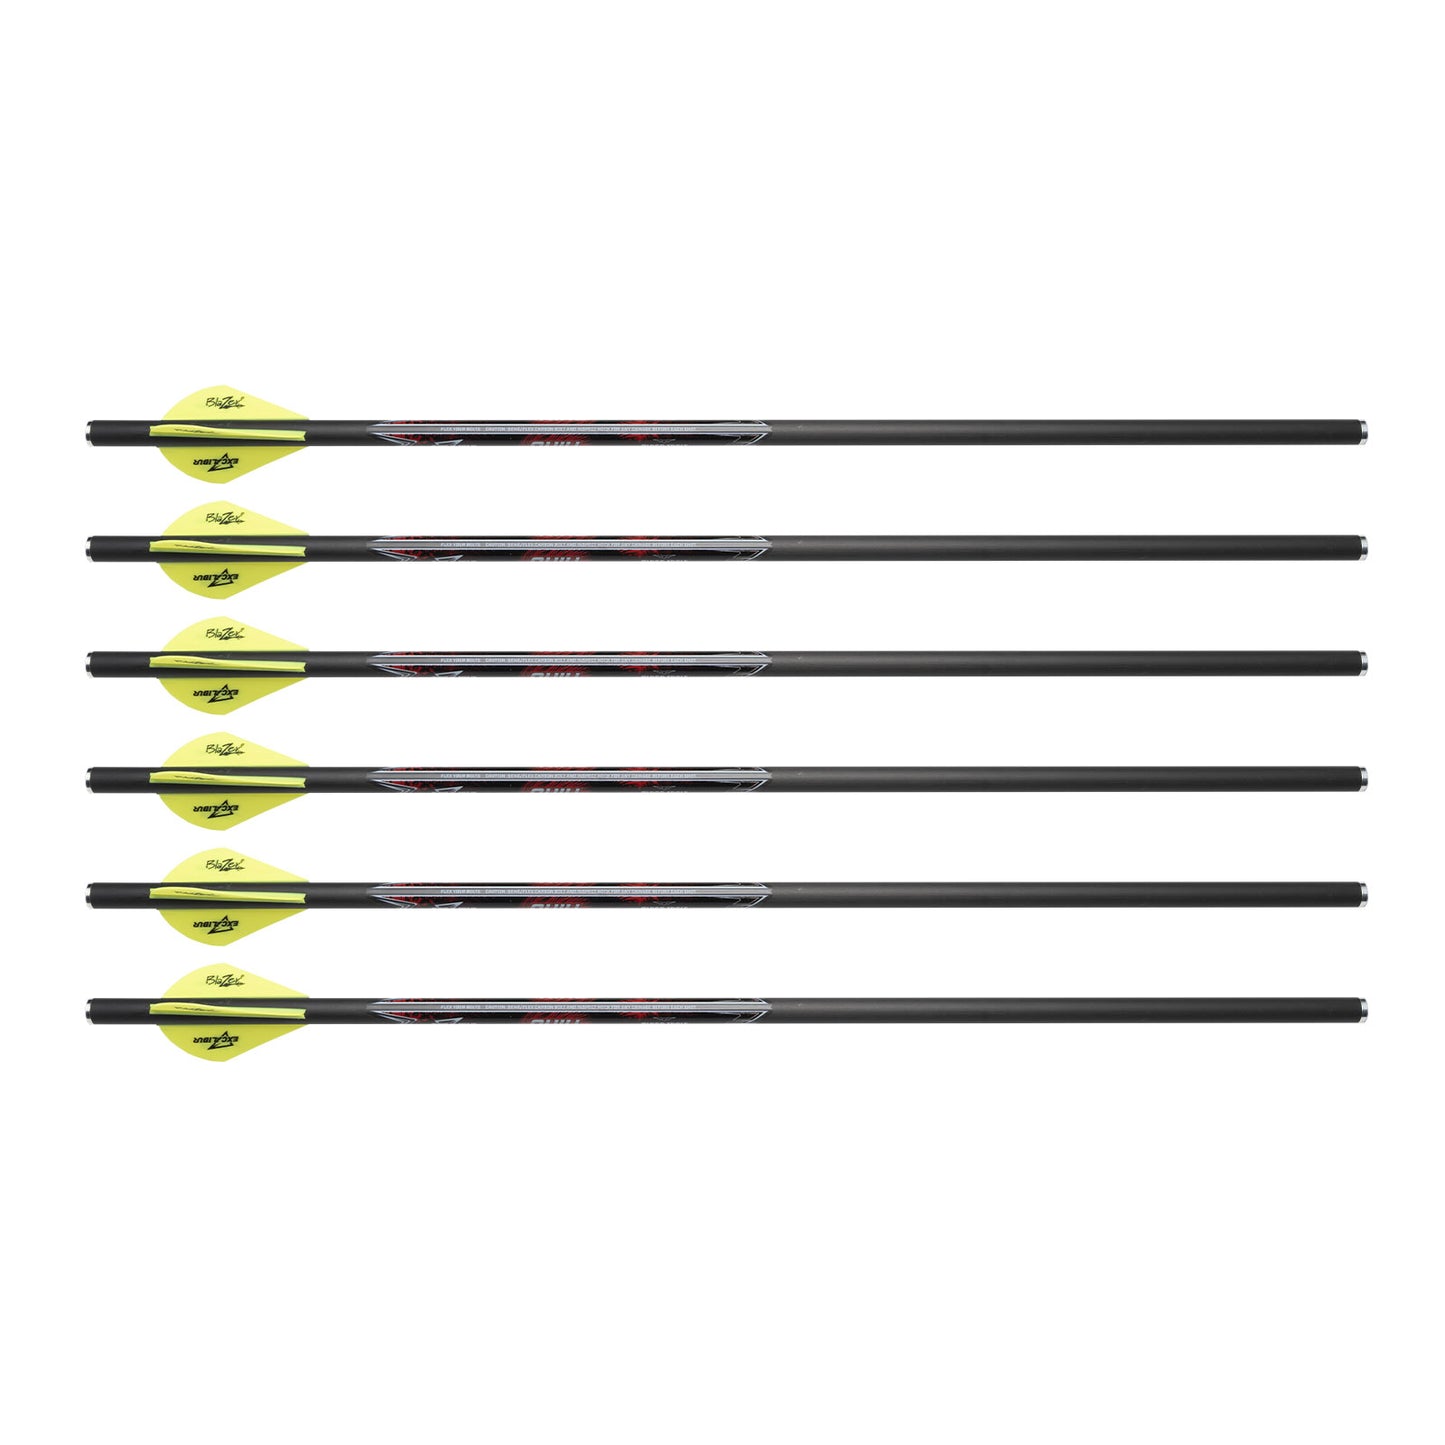 Excalibur Quill Crossbow Bolts 16.5"